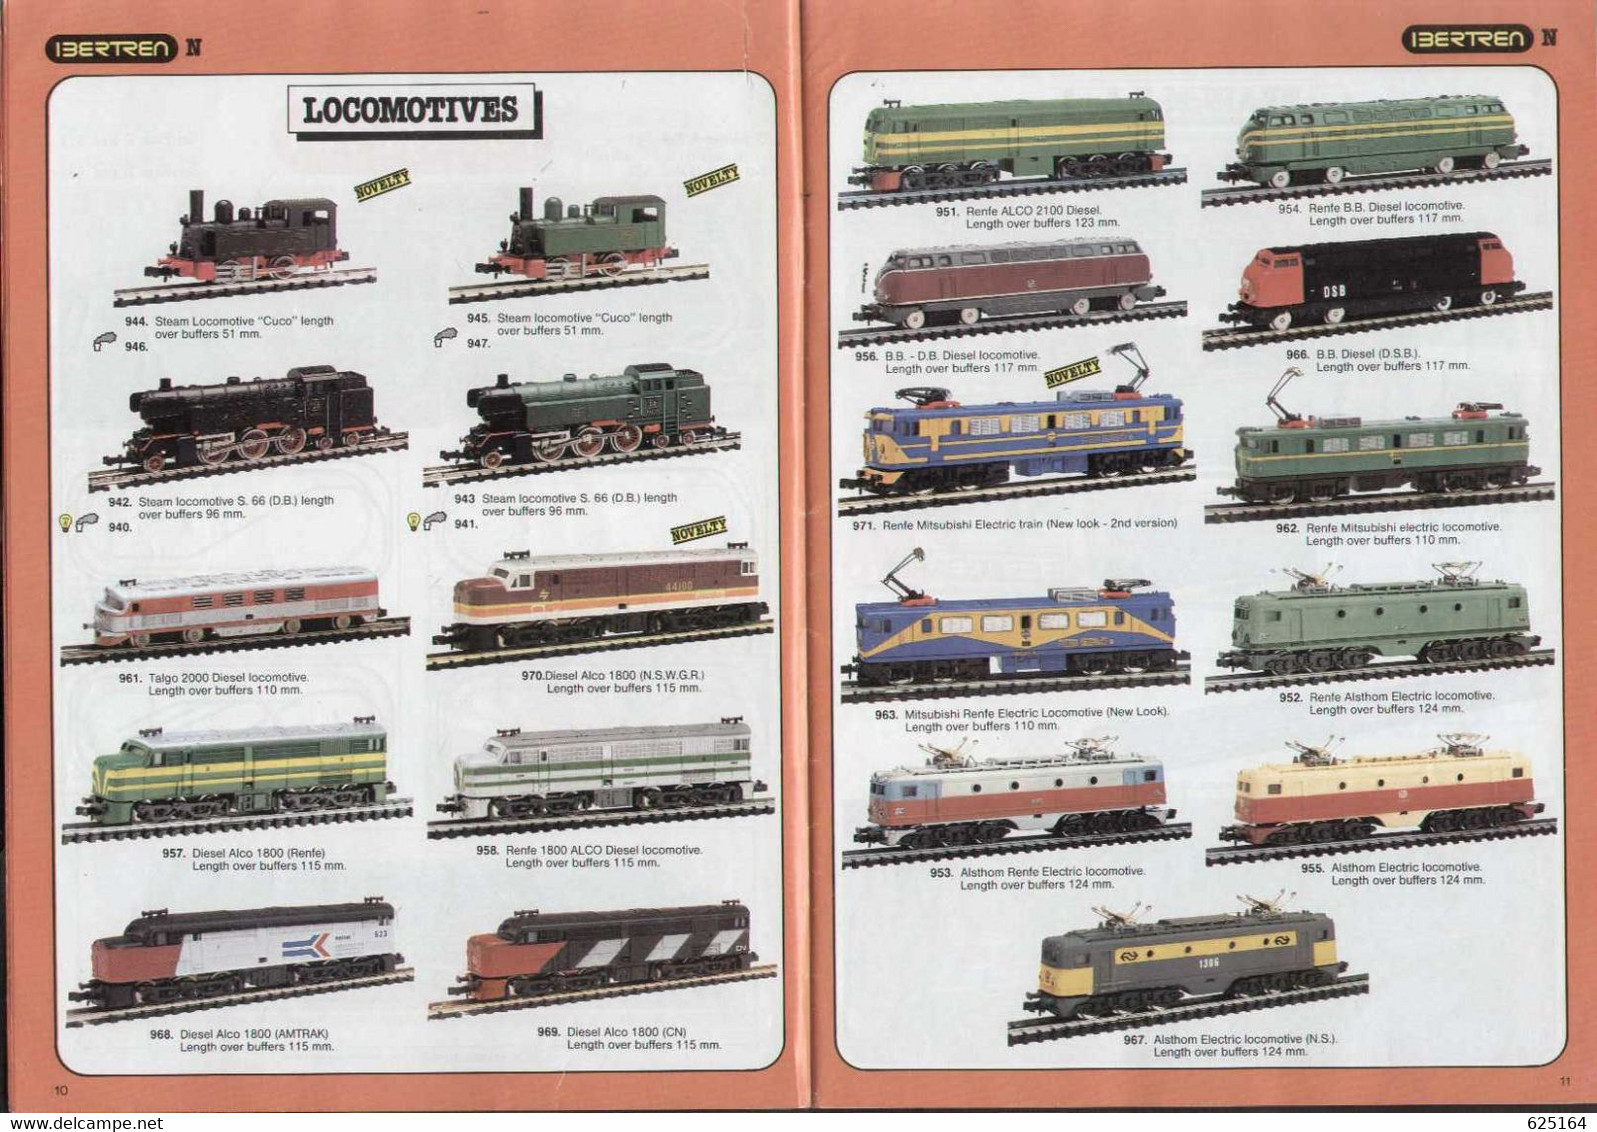 Catalogue IBERTREN 1985  N Scale (1:160) & HO Scale (1:87) English Edition - Englisch